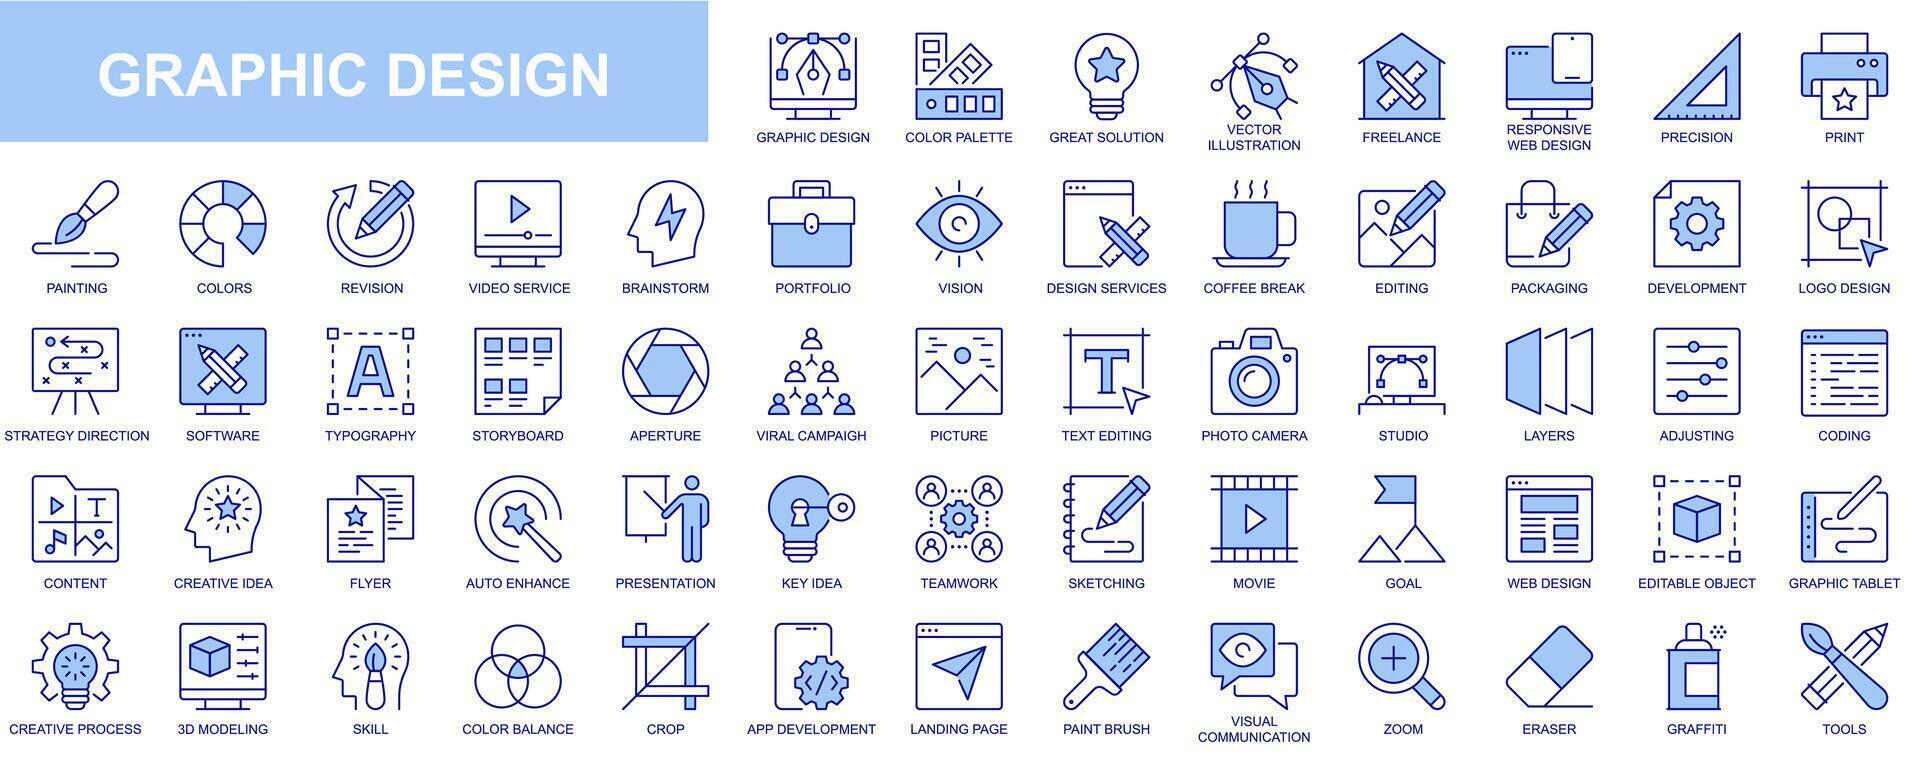 Graphic design web icons set in blue line design. Pack of color palette, solution, freelance, print, painting, video service, brainstorming, portfolio, editing, other. Vector outline stroke pictograms